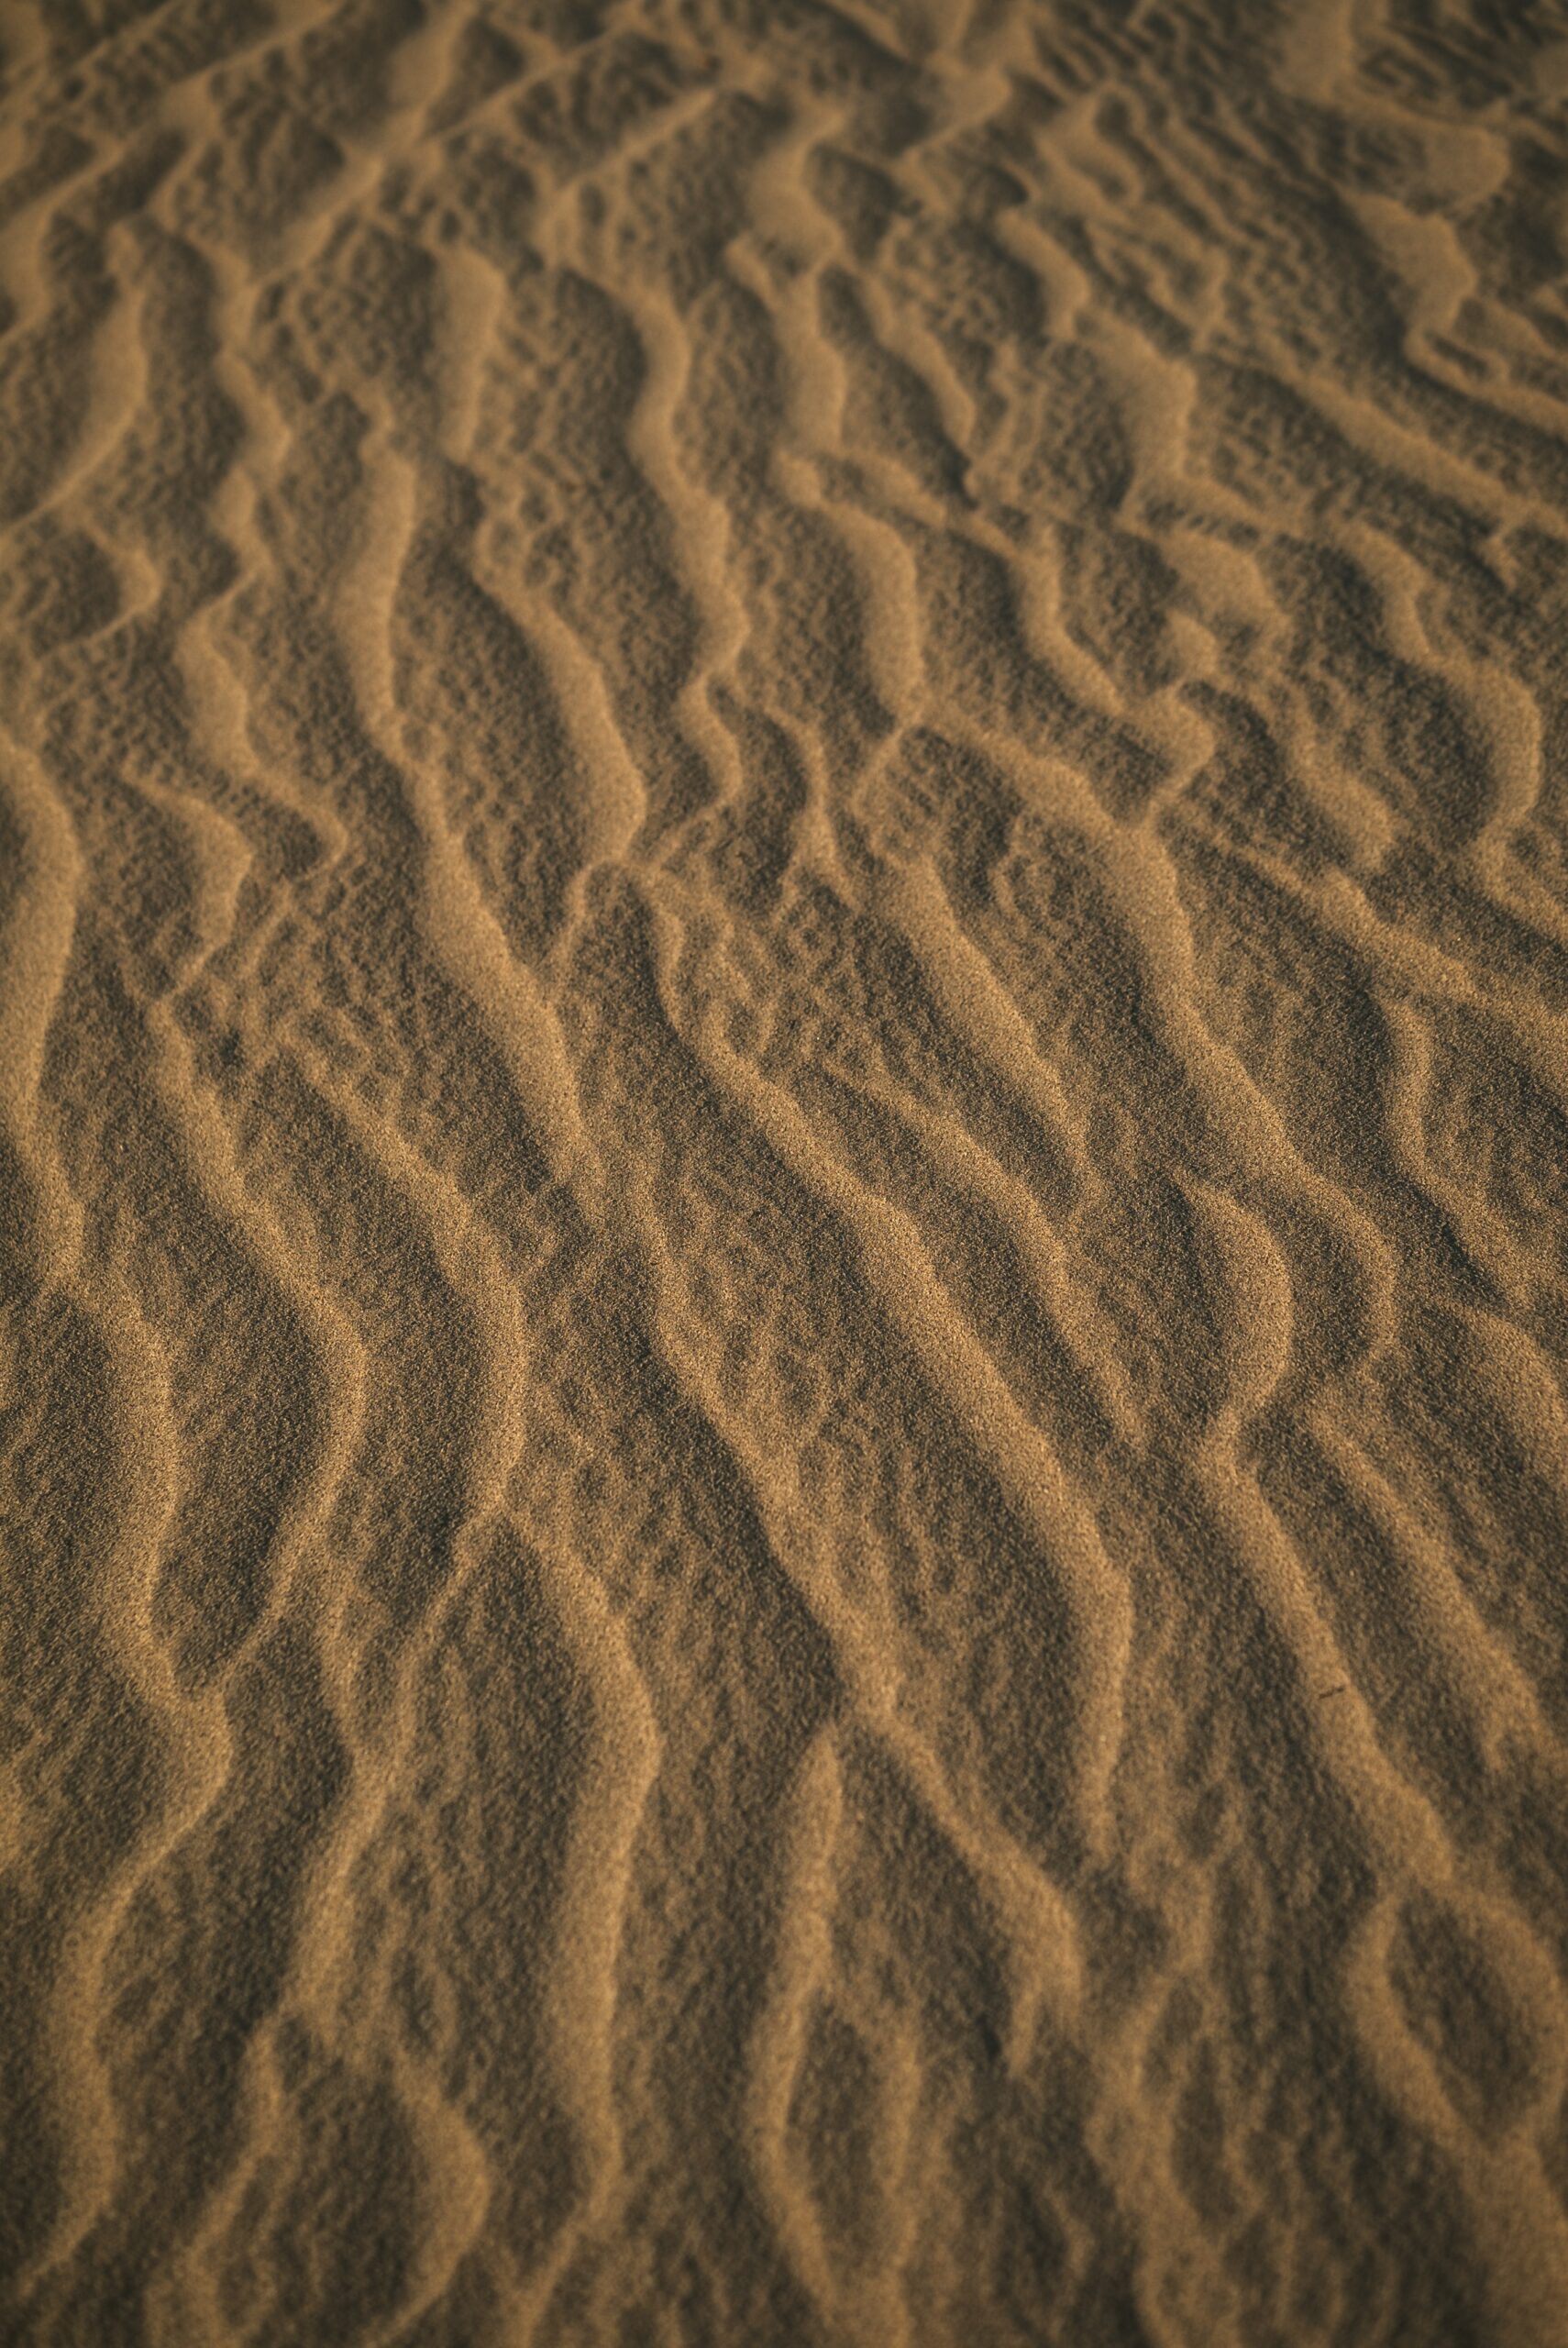 ripples in sand